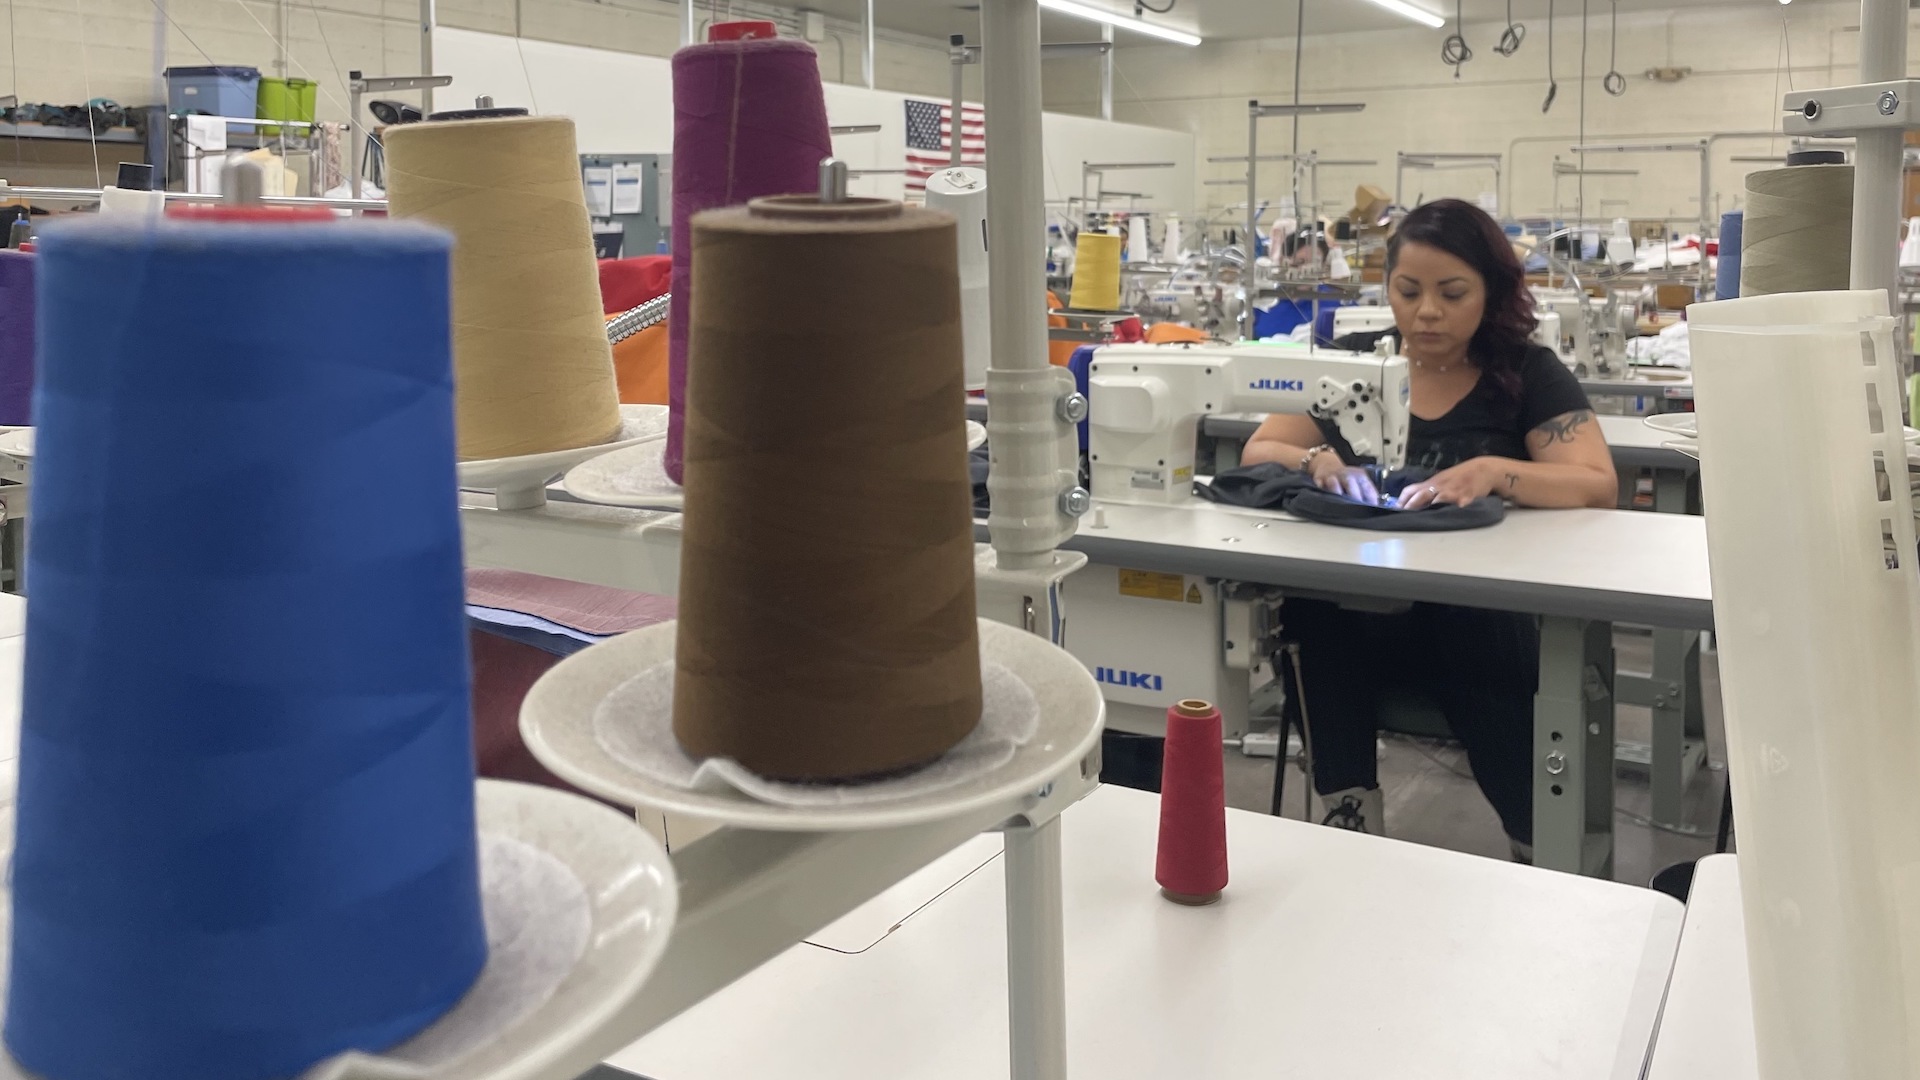 In addition to housing the classes, the Sonoran Stitch Factory also contracts work with businesses in the area.